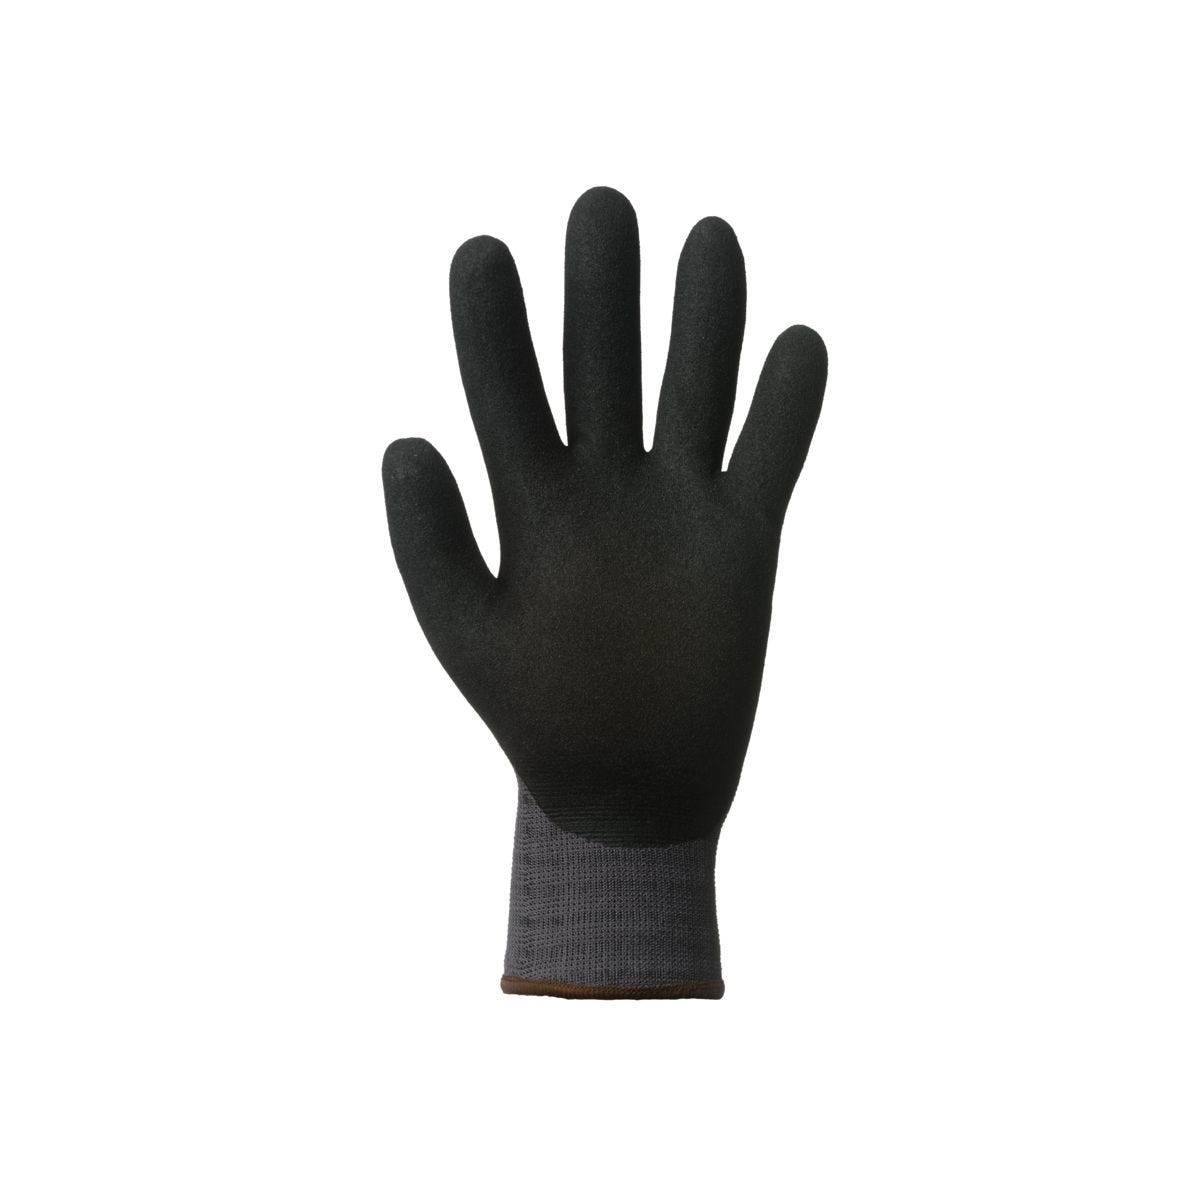 Gants EUROGRIP 15N500 dble enduction nitrile paume - Coverguard - Taille S-7 1